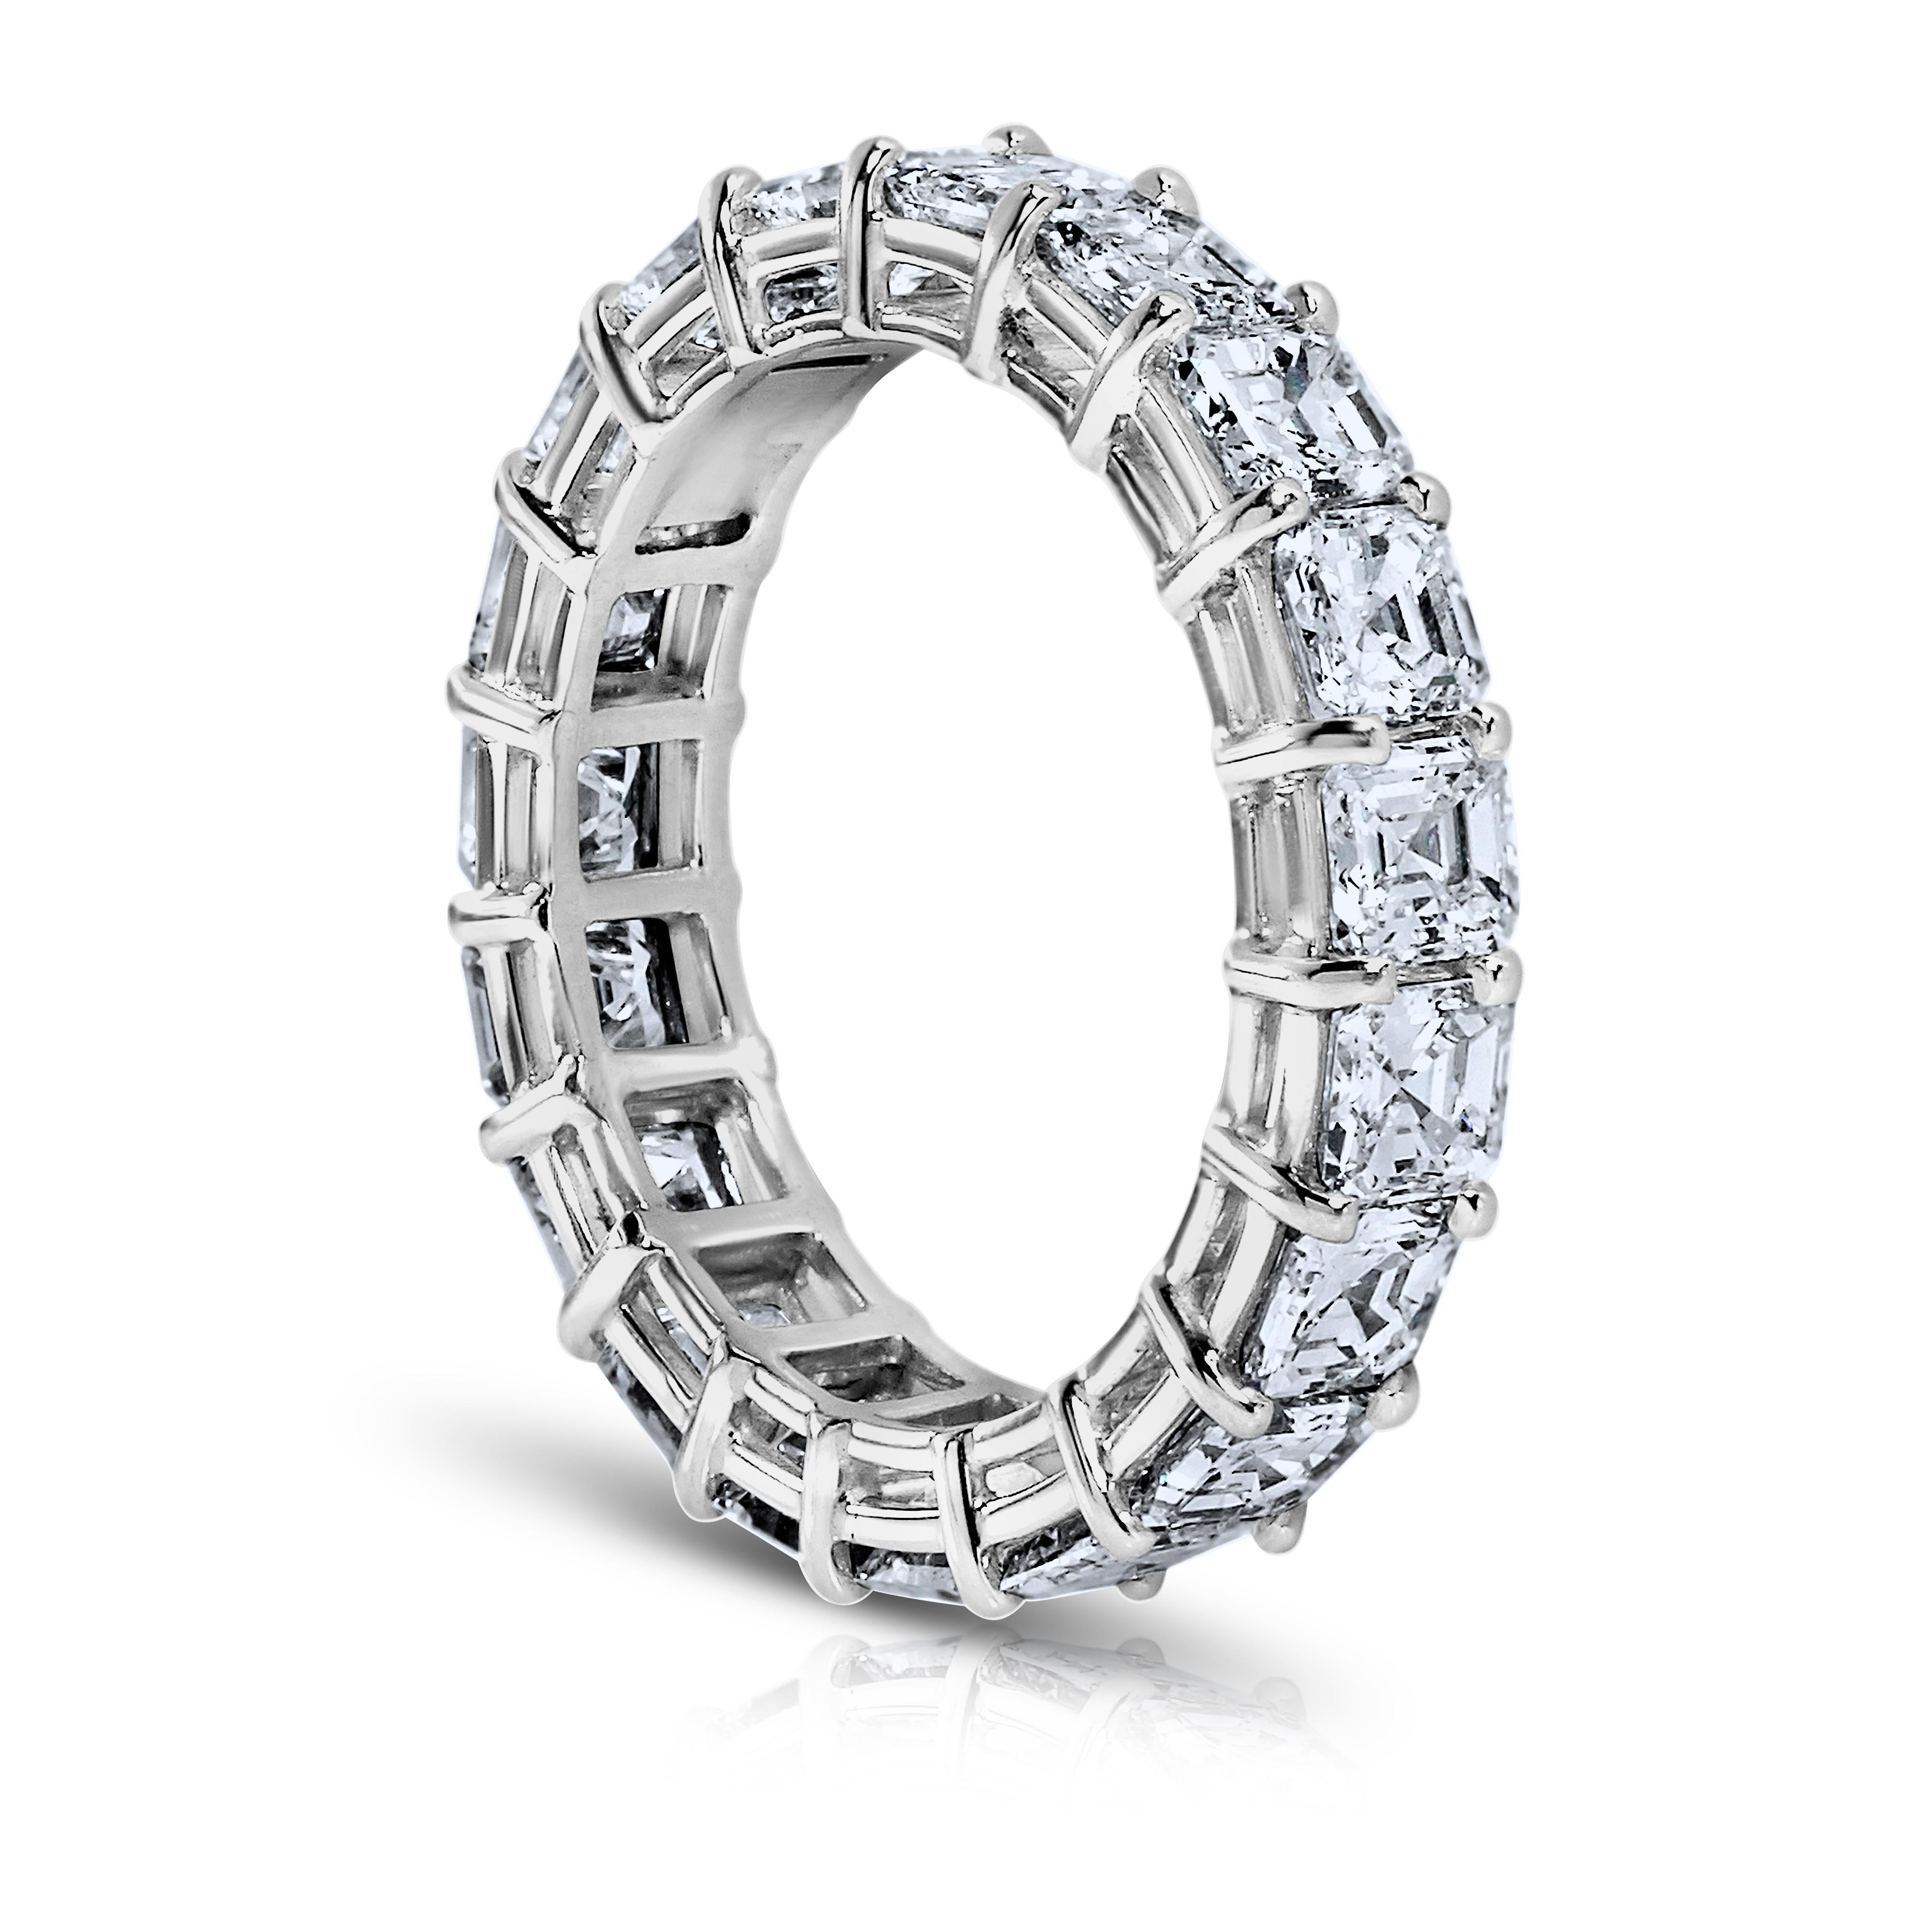  
Asher Cut  diamond ring platinum eternity band shared prong style with a gallery.
17 perfectly matched diamonds weighing a minimum of 5.10 cts. G.I.A certificates for each diamond . Ranging from D-F in color . VVS1-VS2 in clarity .Finger size 5.